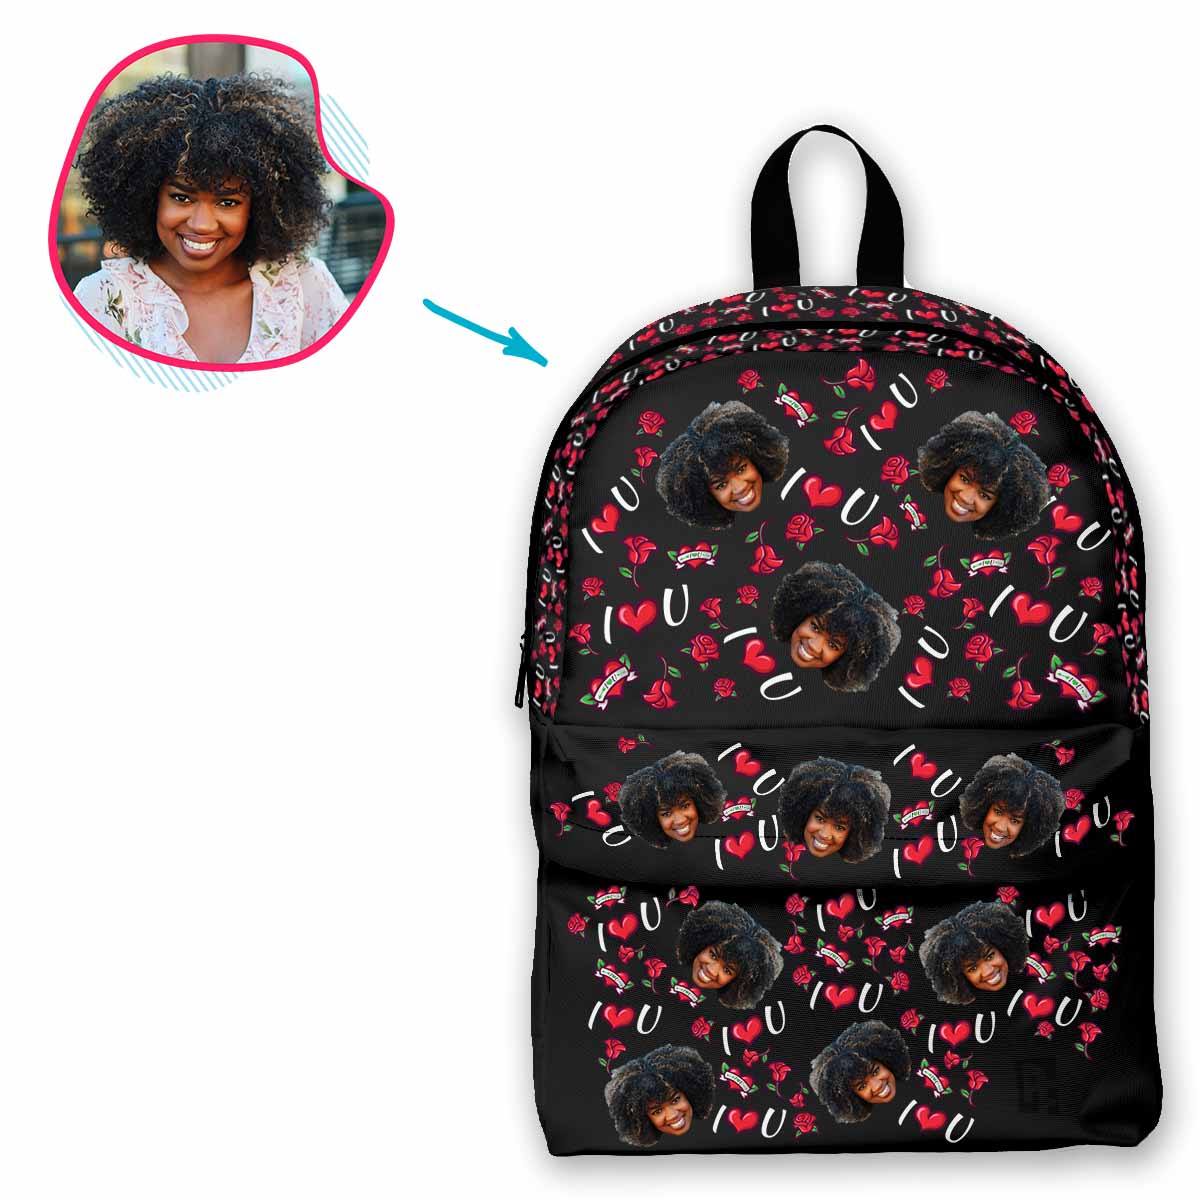 dark Valentines classic backpack personalized with photo of face printed on it